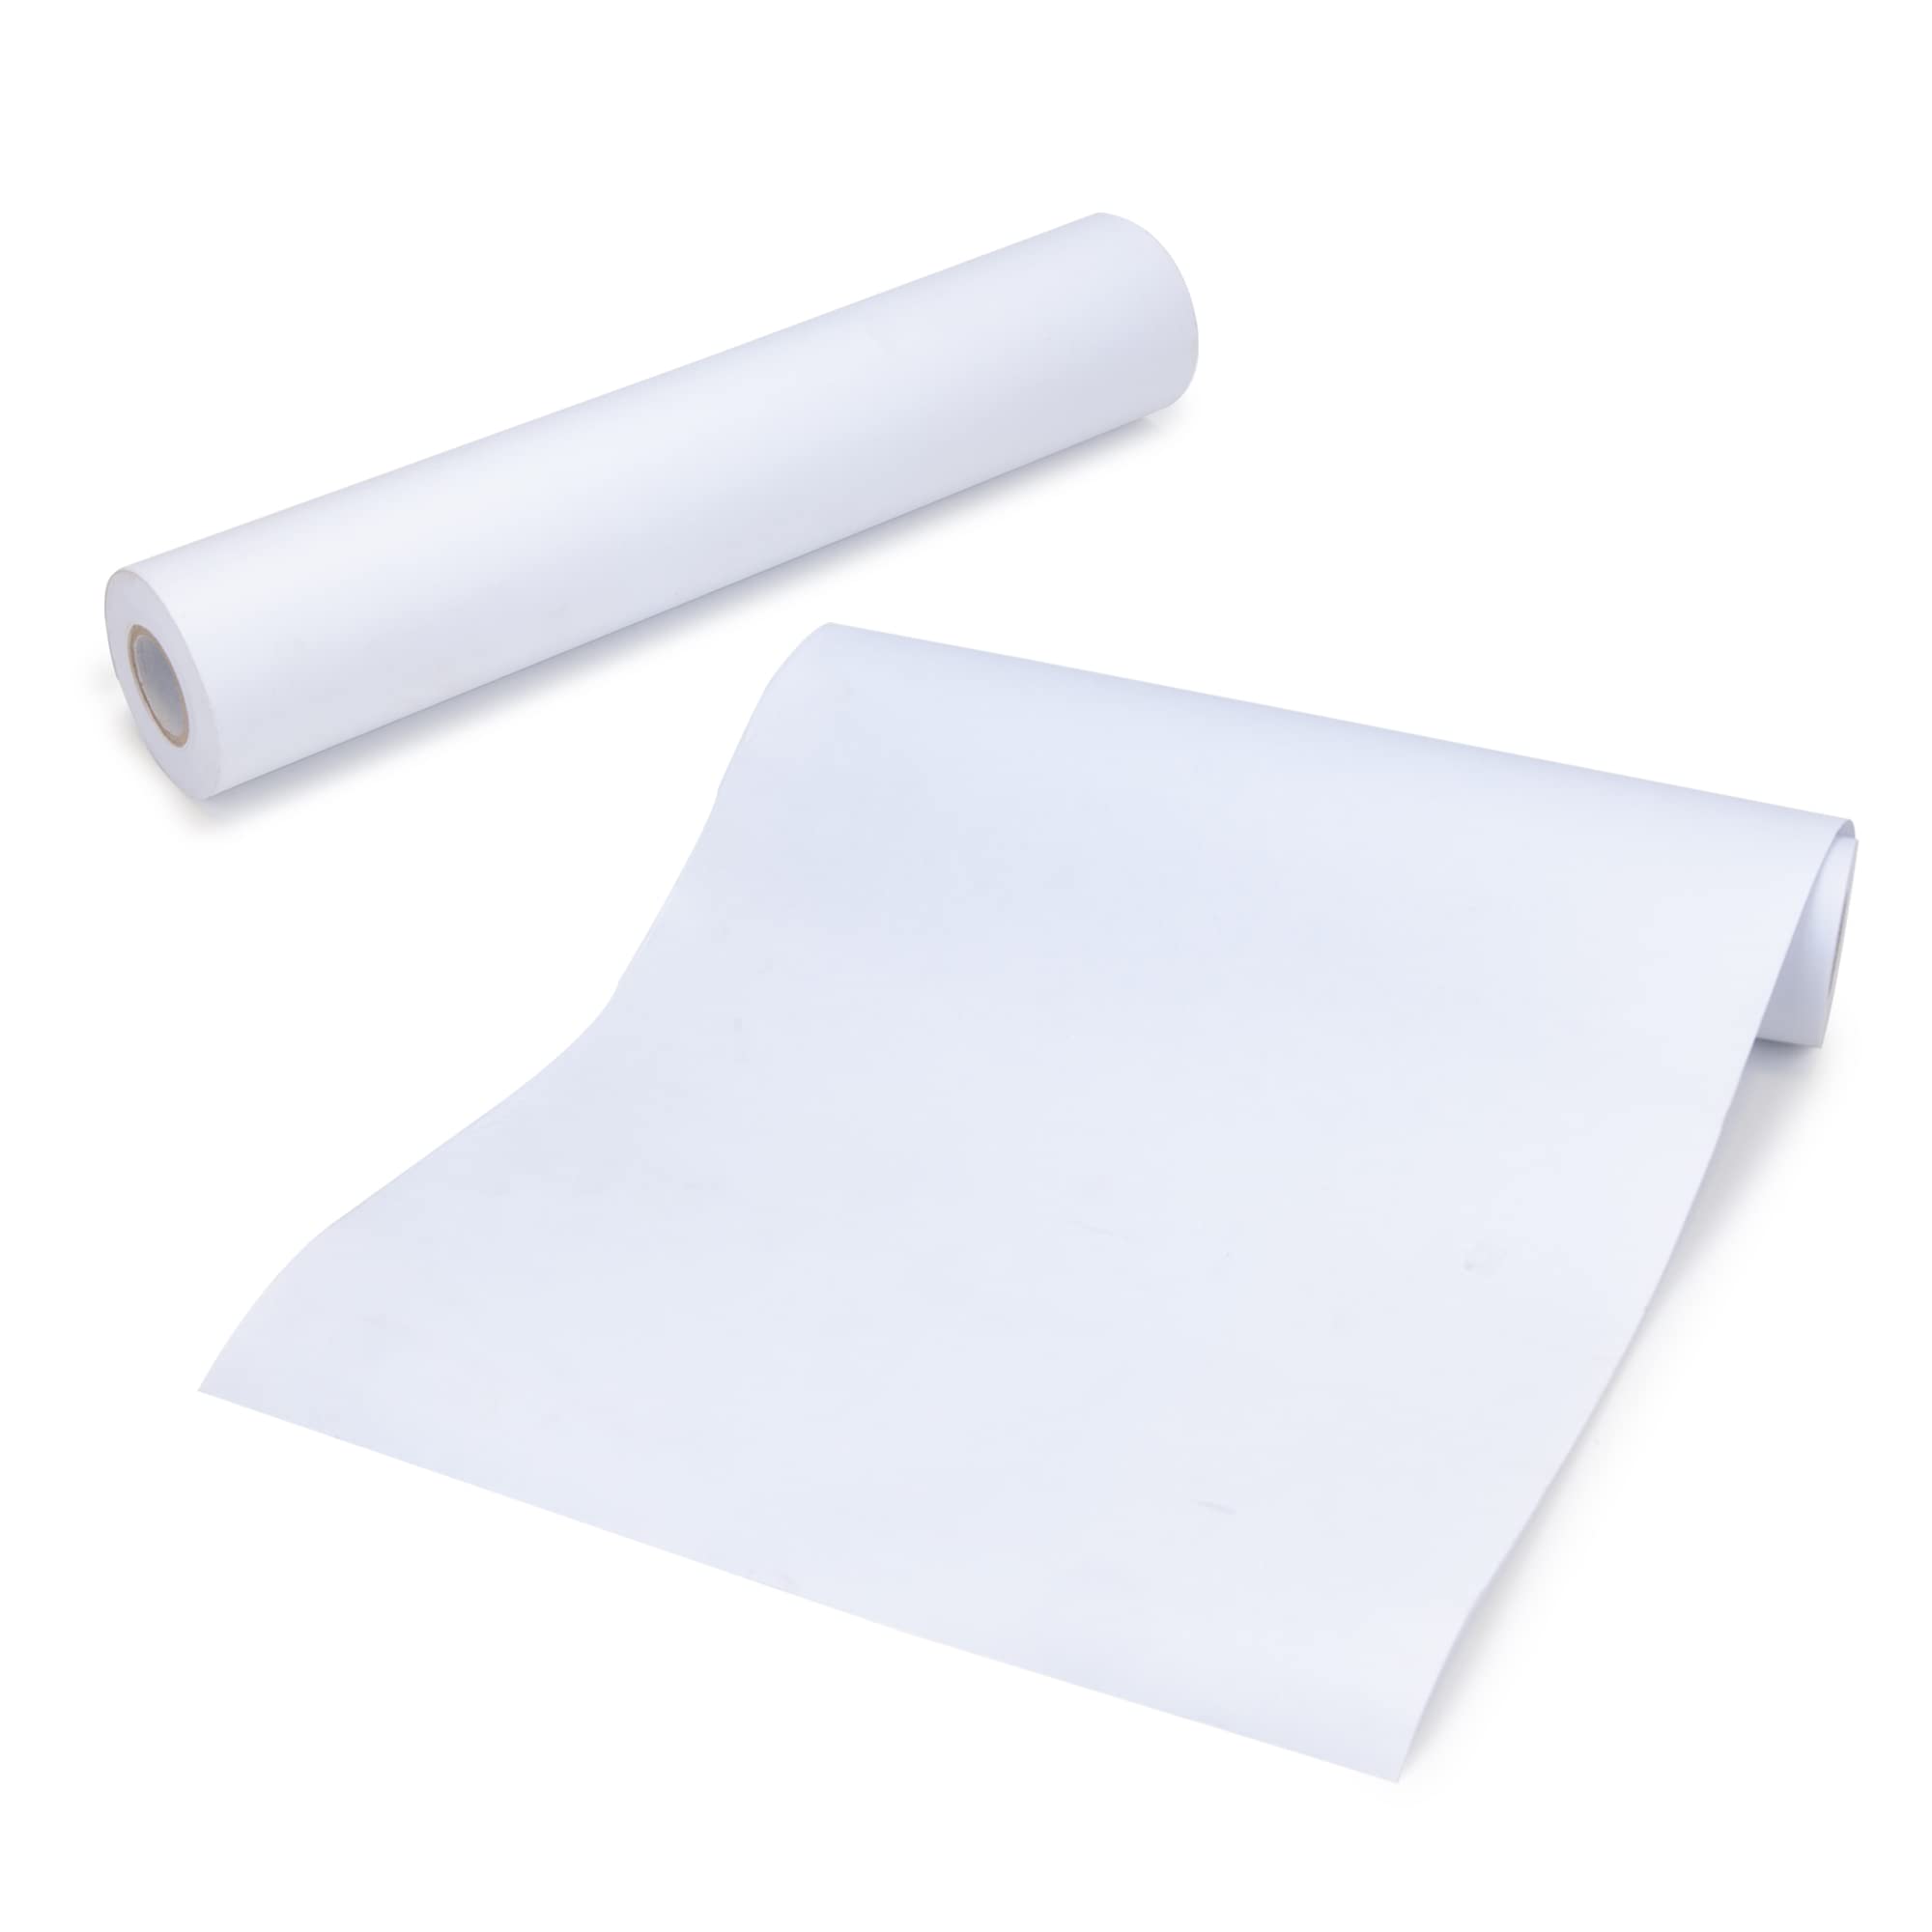 2 Rolls White Arts and Crafts Paper Rolls Fadeless Bulletin Board Paper, Size: 500X30CM